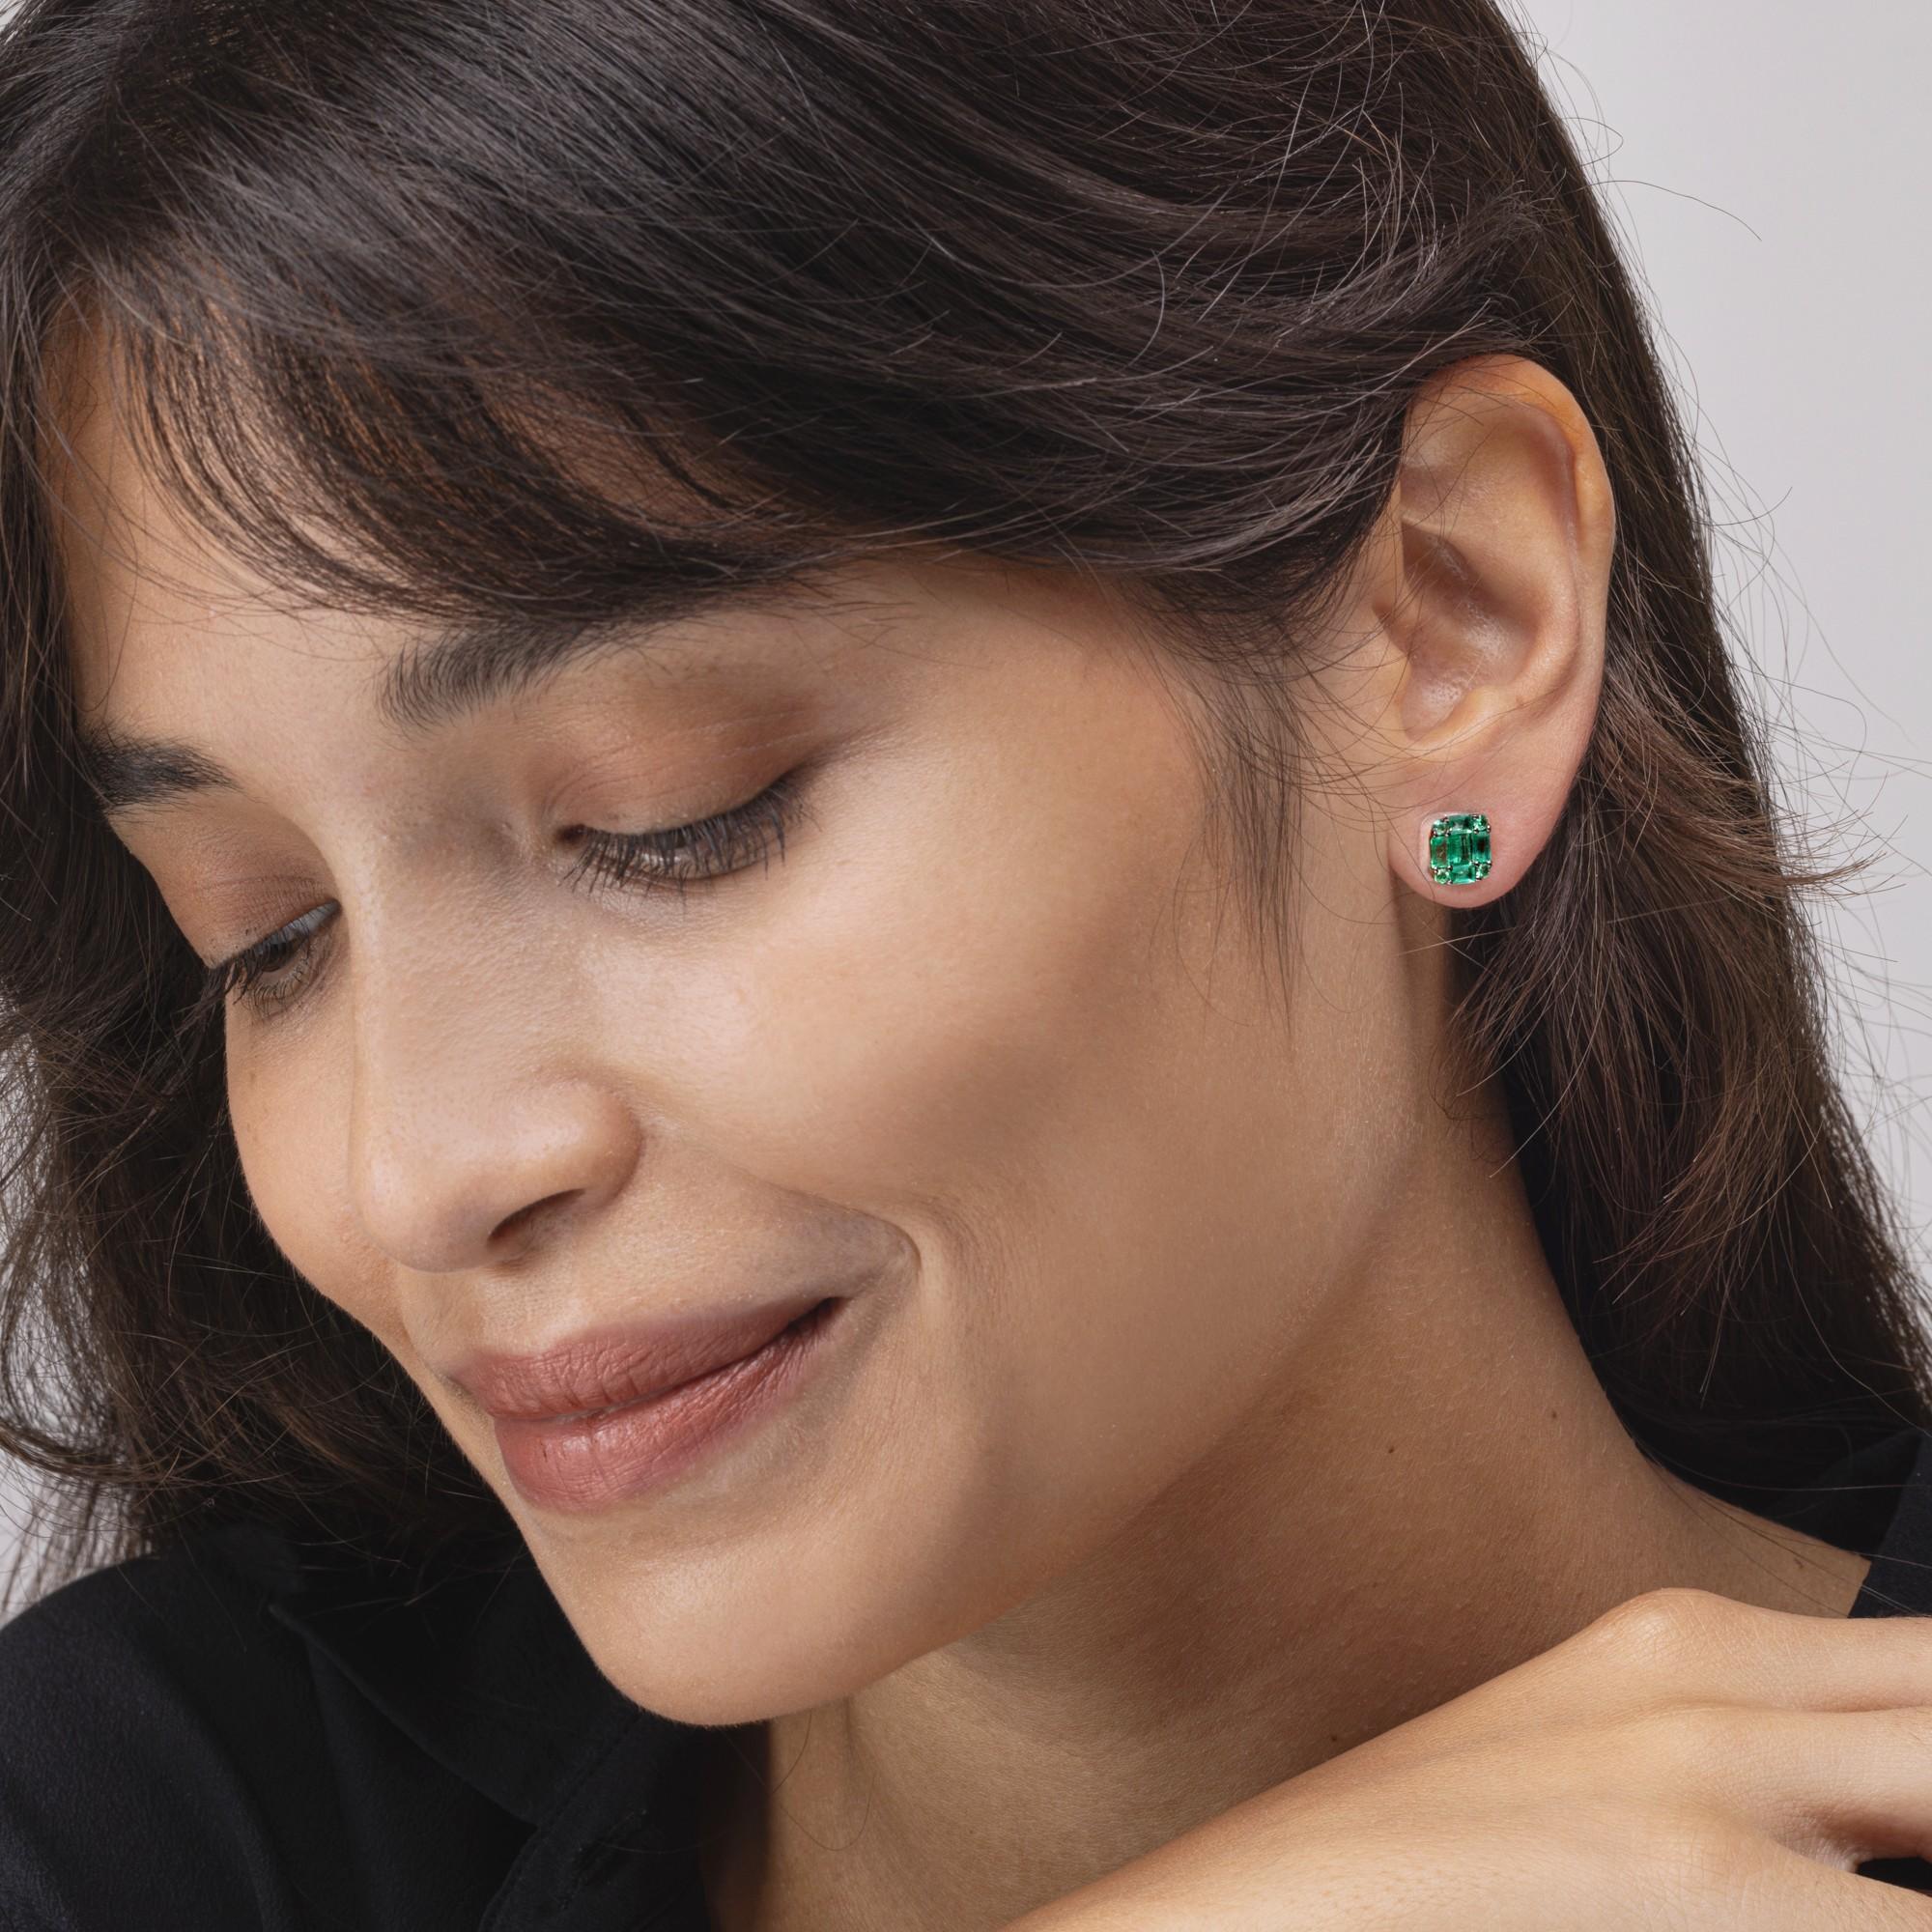 Alex Jona design collection, hand crafted in Italy, 18 karat white gold stud earrings set with 1.48 carats of emeralds.

Alex Jona jewels stand out, not only for their special design and for the excellent quality of the gemstones, but also for the